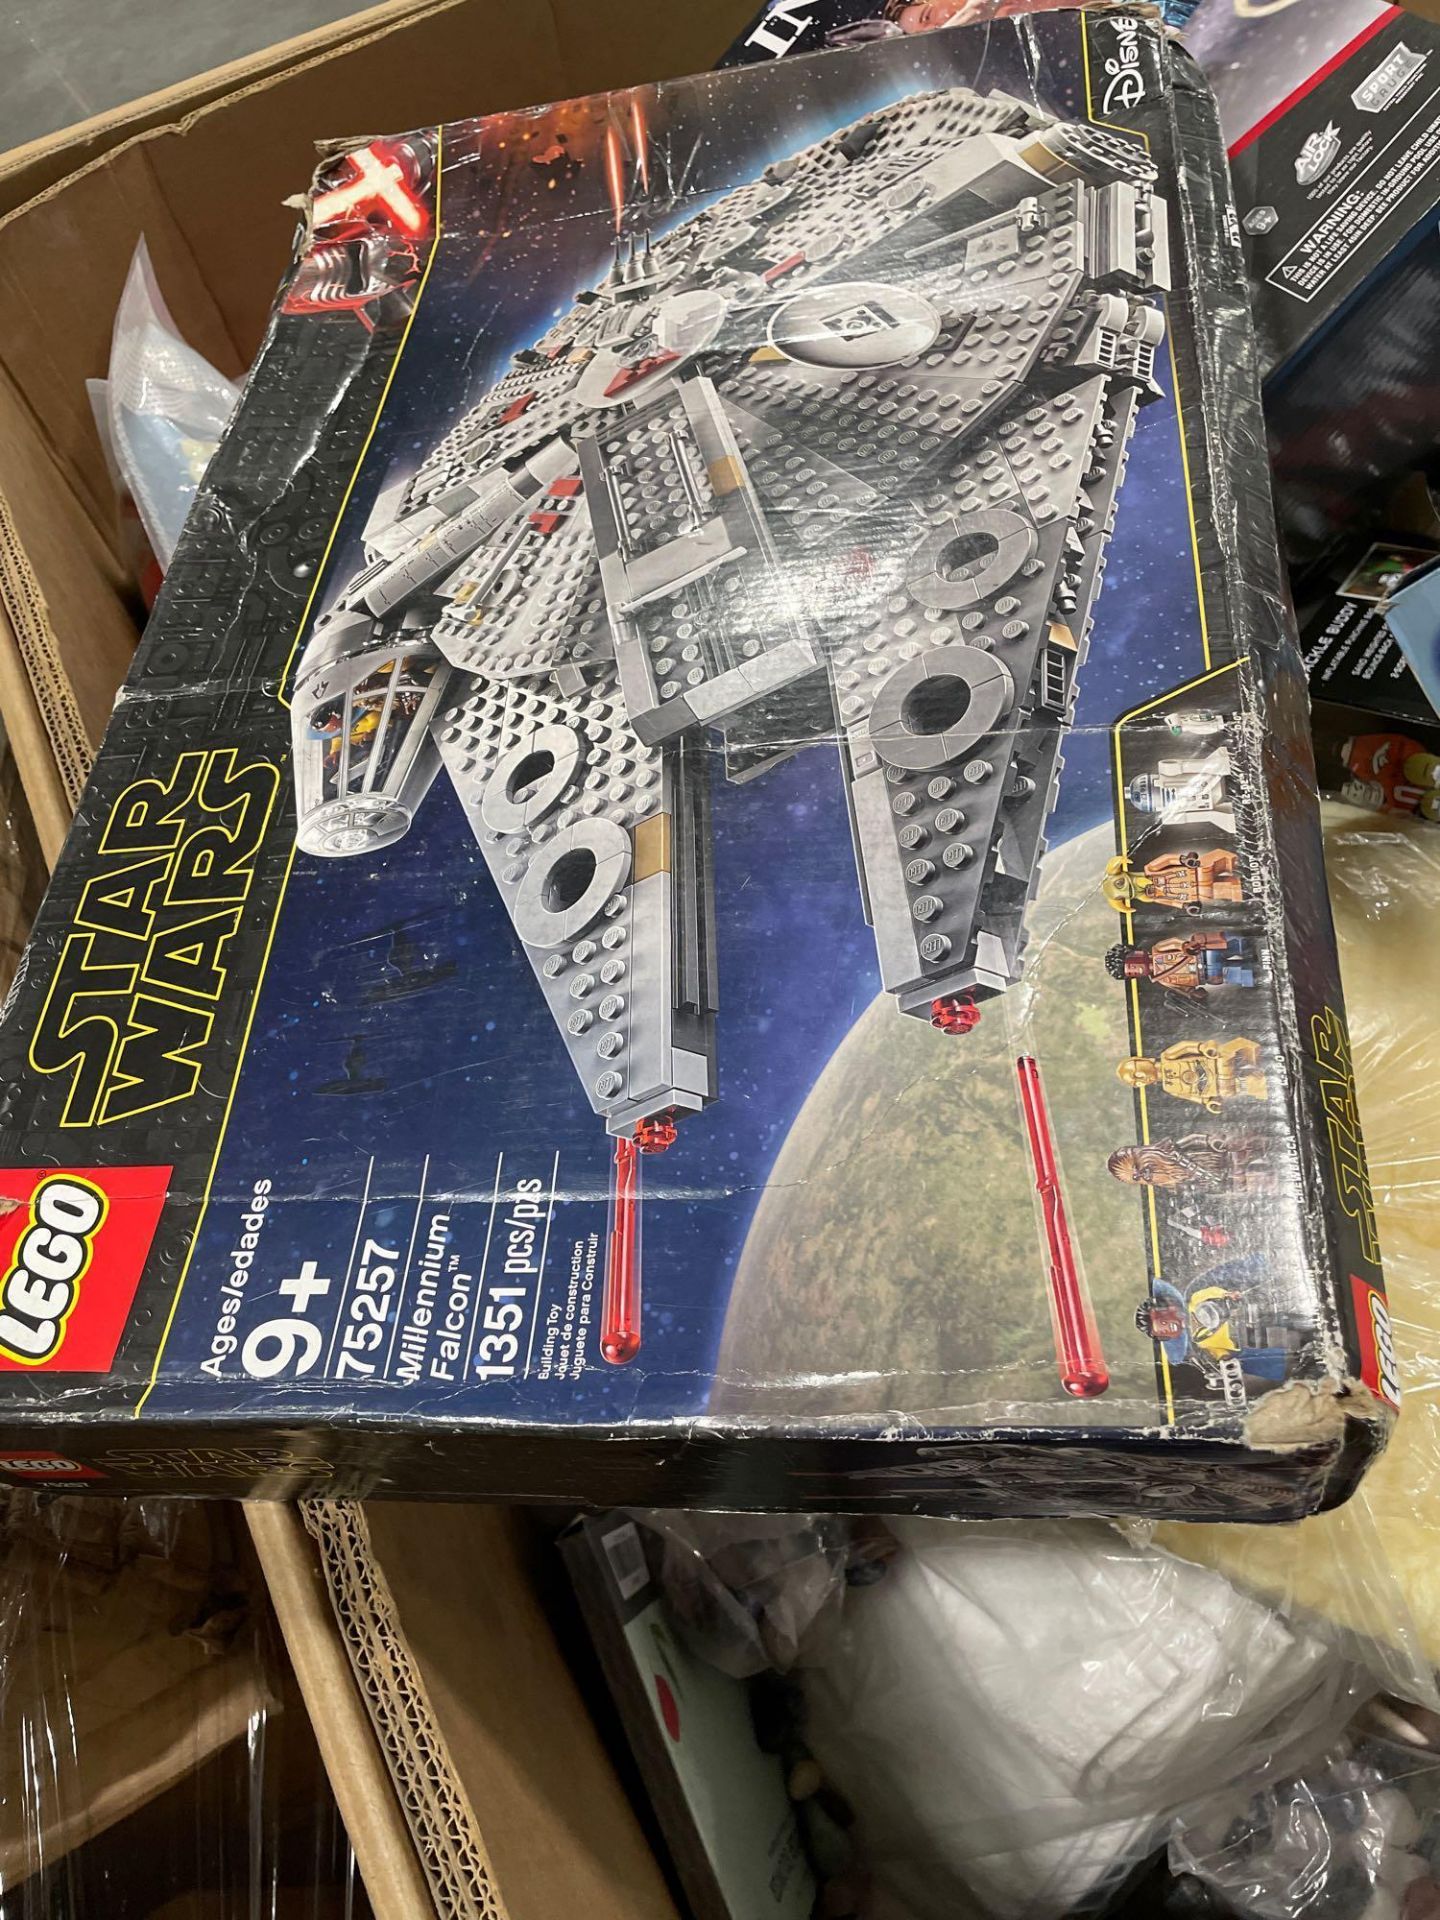 Lego Millenium Falcon and more - Image 4 of 9